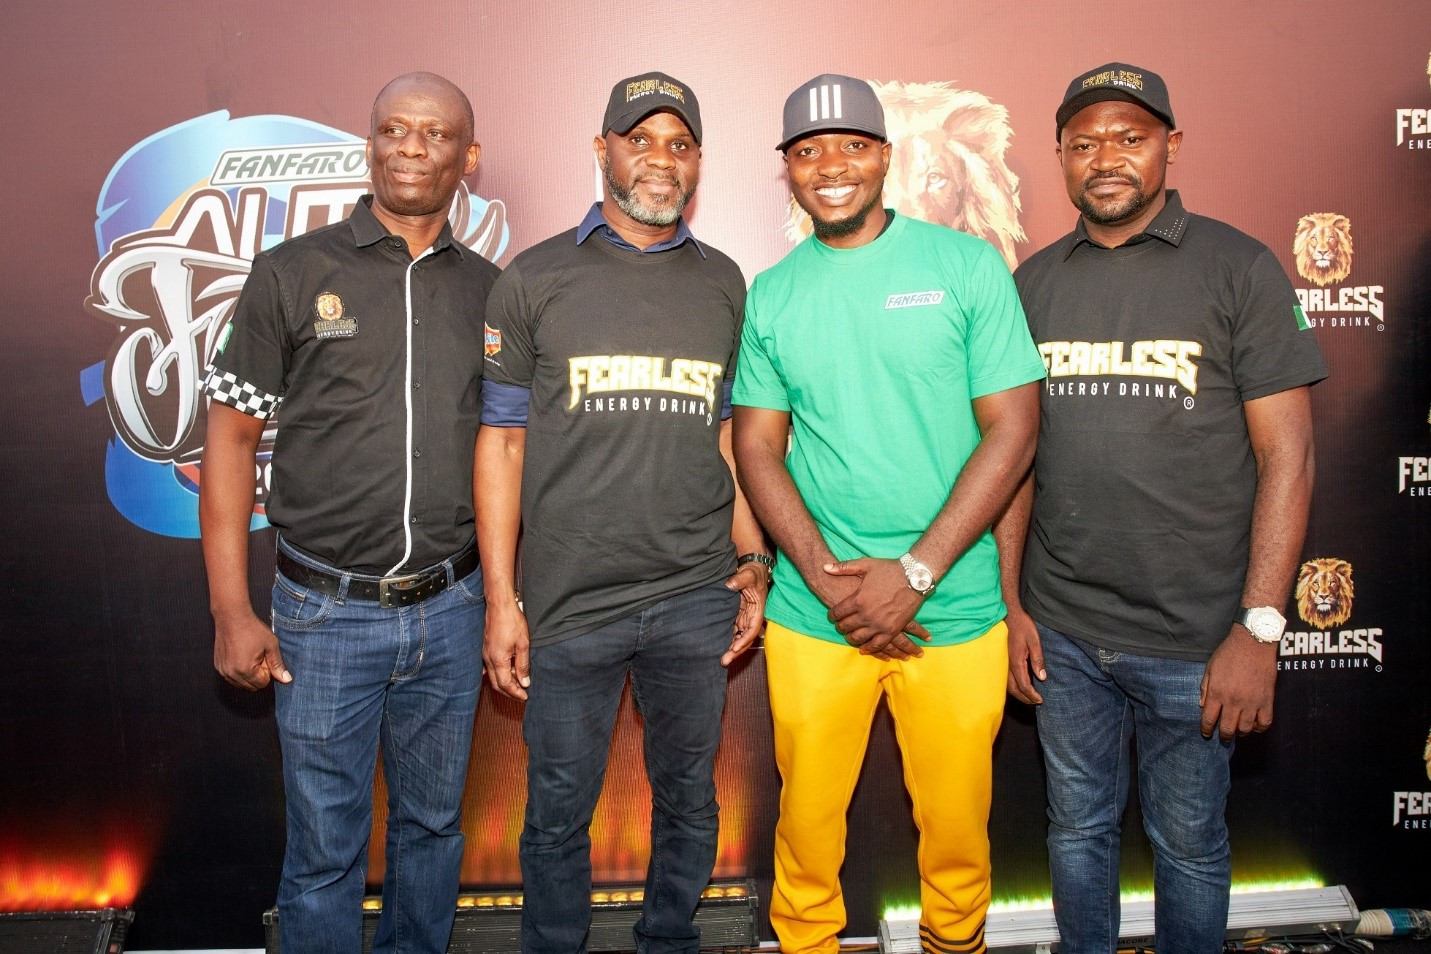 Fearless Energy Drink Consumers and Sports Lovers Thrilled to Audacious Fun at Fearless-Fanfaro Autofest 2022 in Ibadan